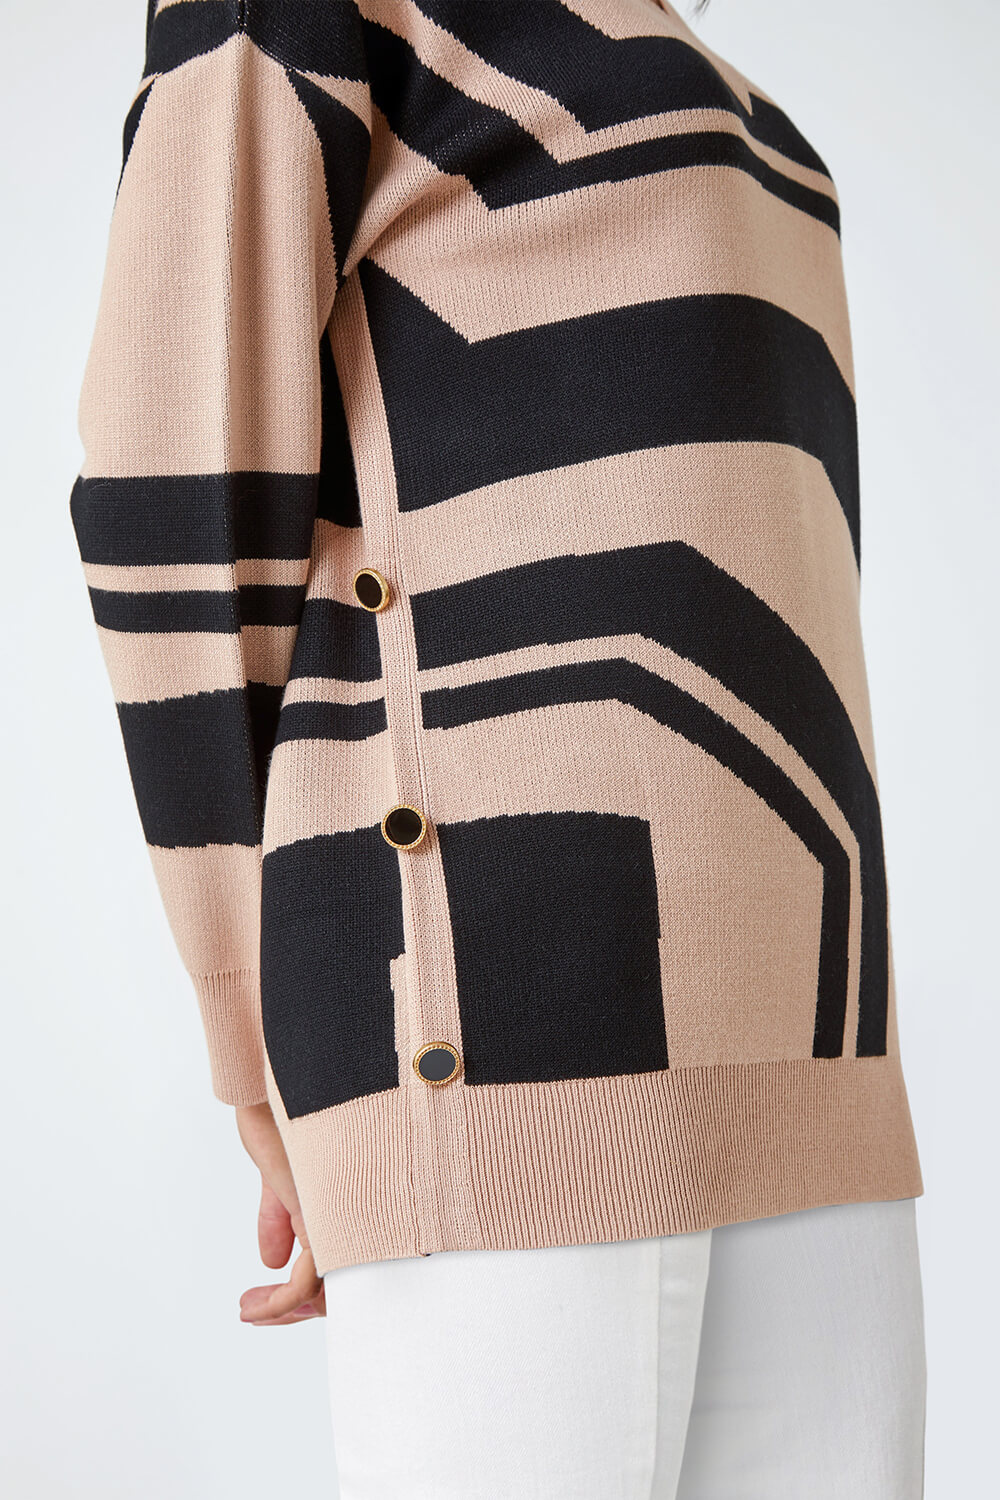 Camel  Abstract Print Button Detail Longline Jumper, Image 5 of 5